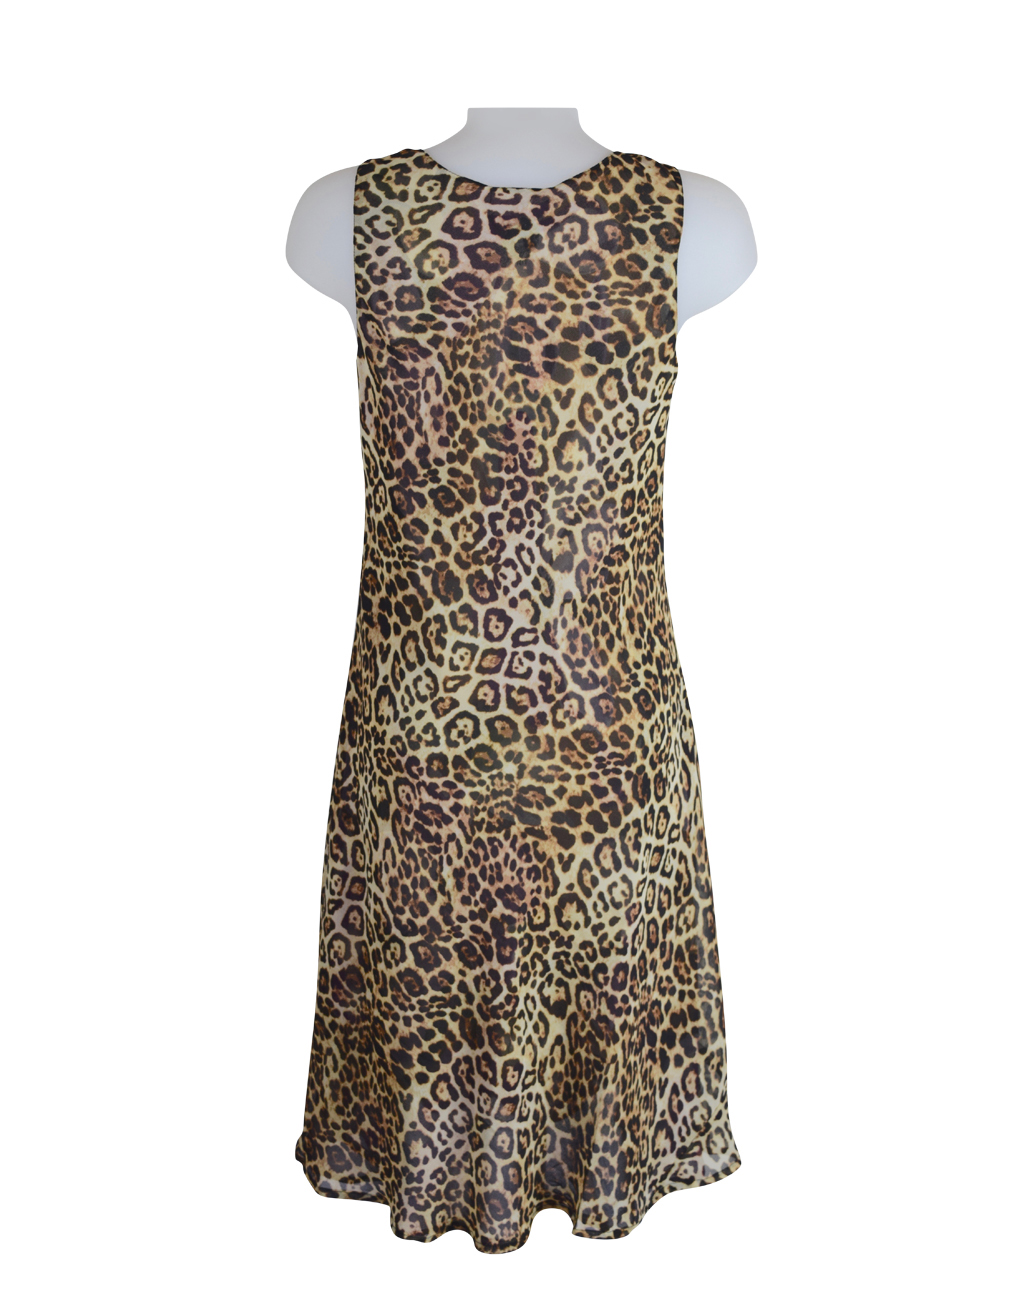 Paramour Reversible 2 In 1 Sleeveless Dress Floral / Leopard C